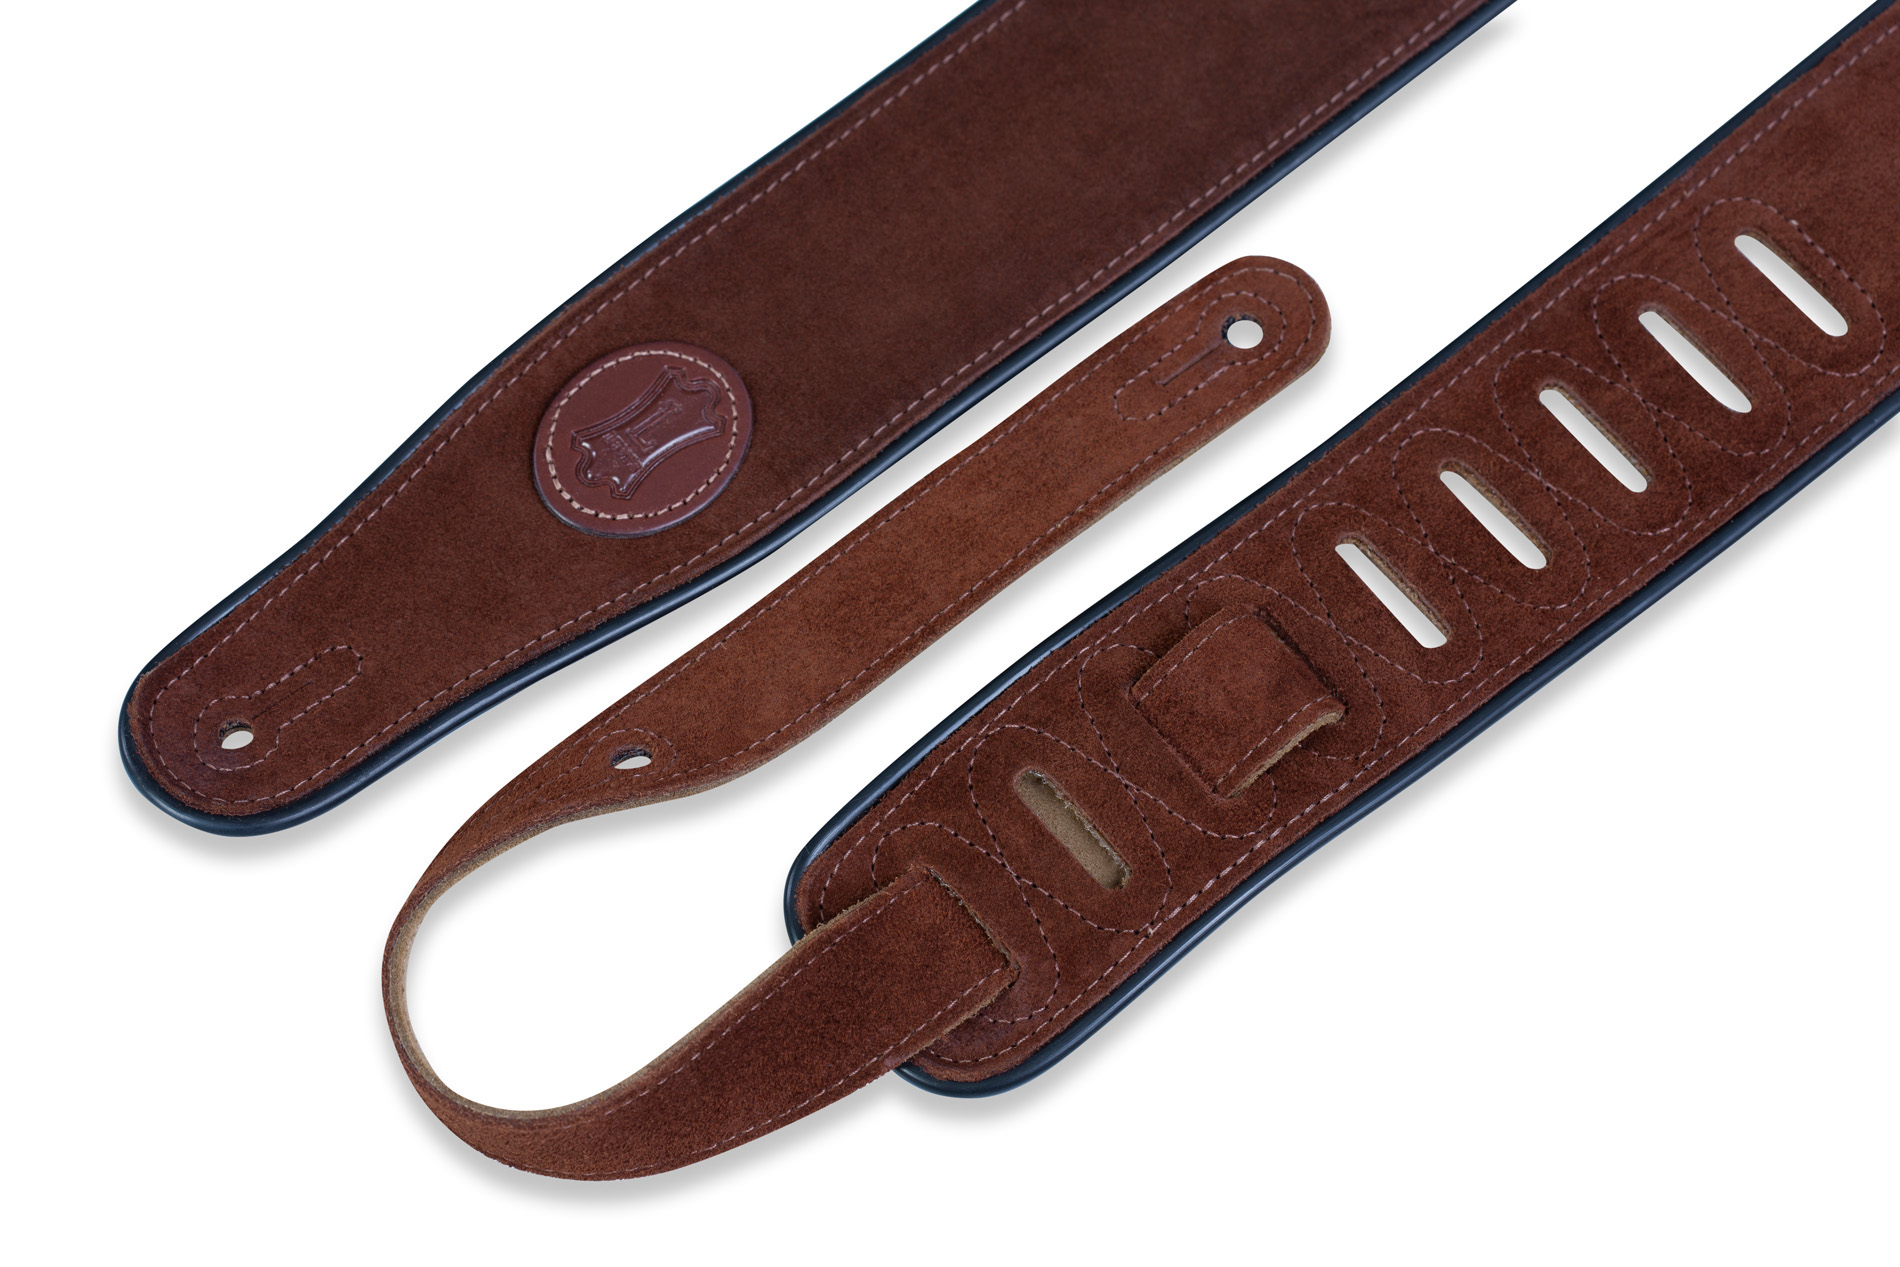 Levy's Suede Leather Sangle Daim Mss3 Brown - Guitar strap - Variation 3